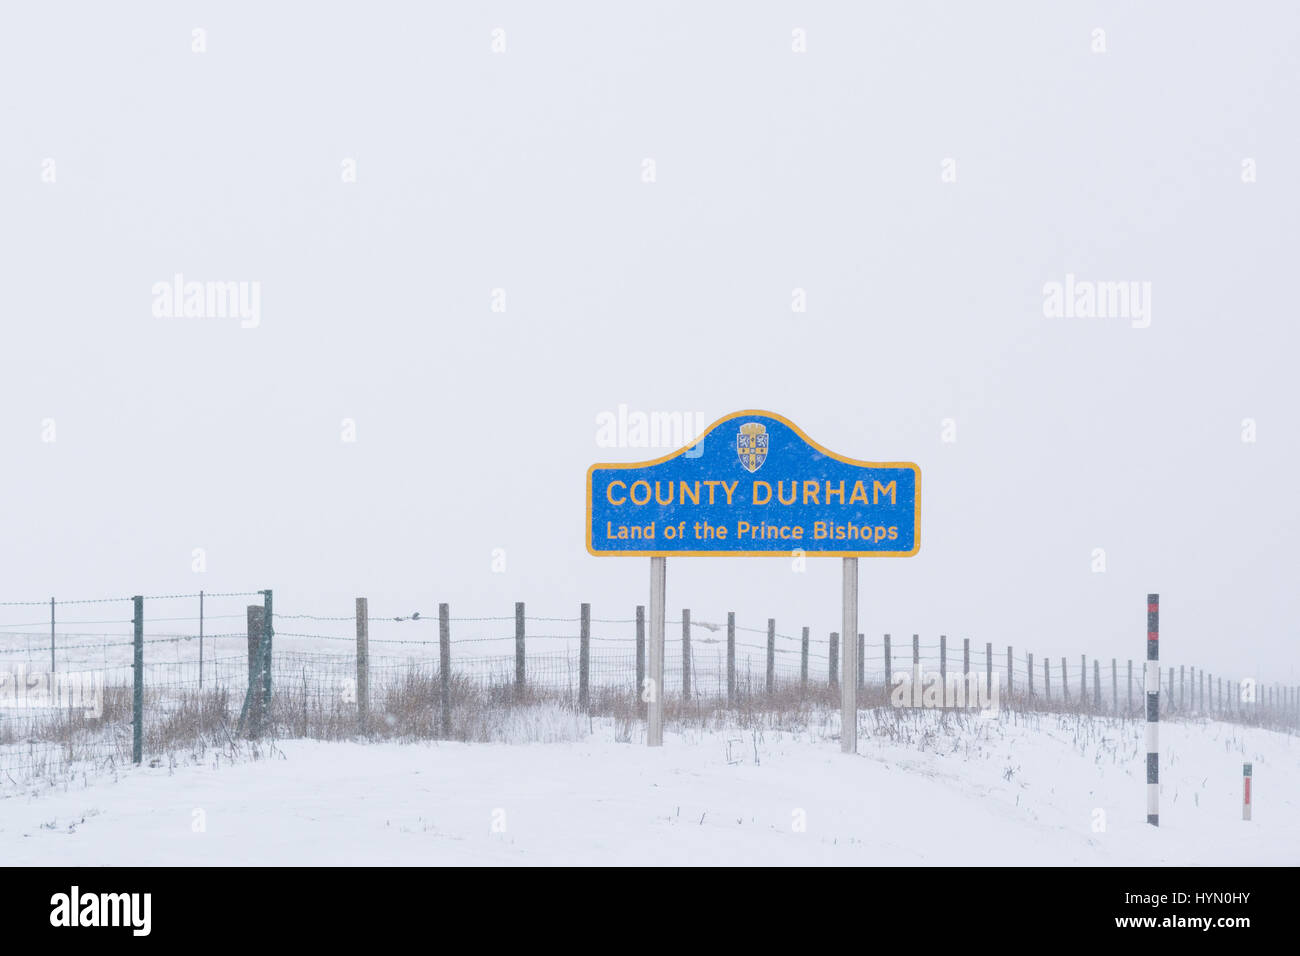 County Durham Land of the Prince Bishops sign on A66 road heading eastwards, England, UK Stock Photo